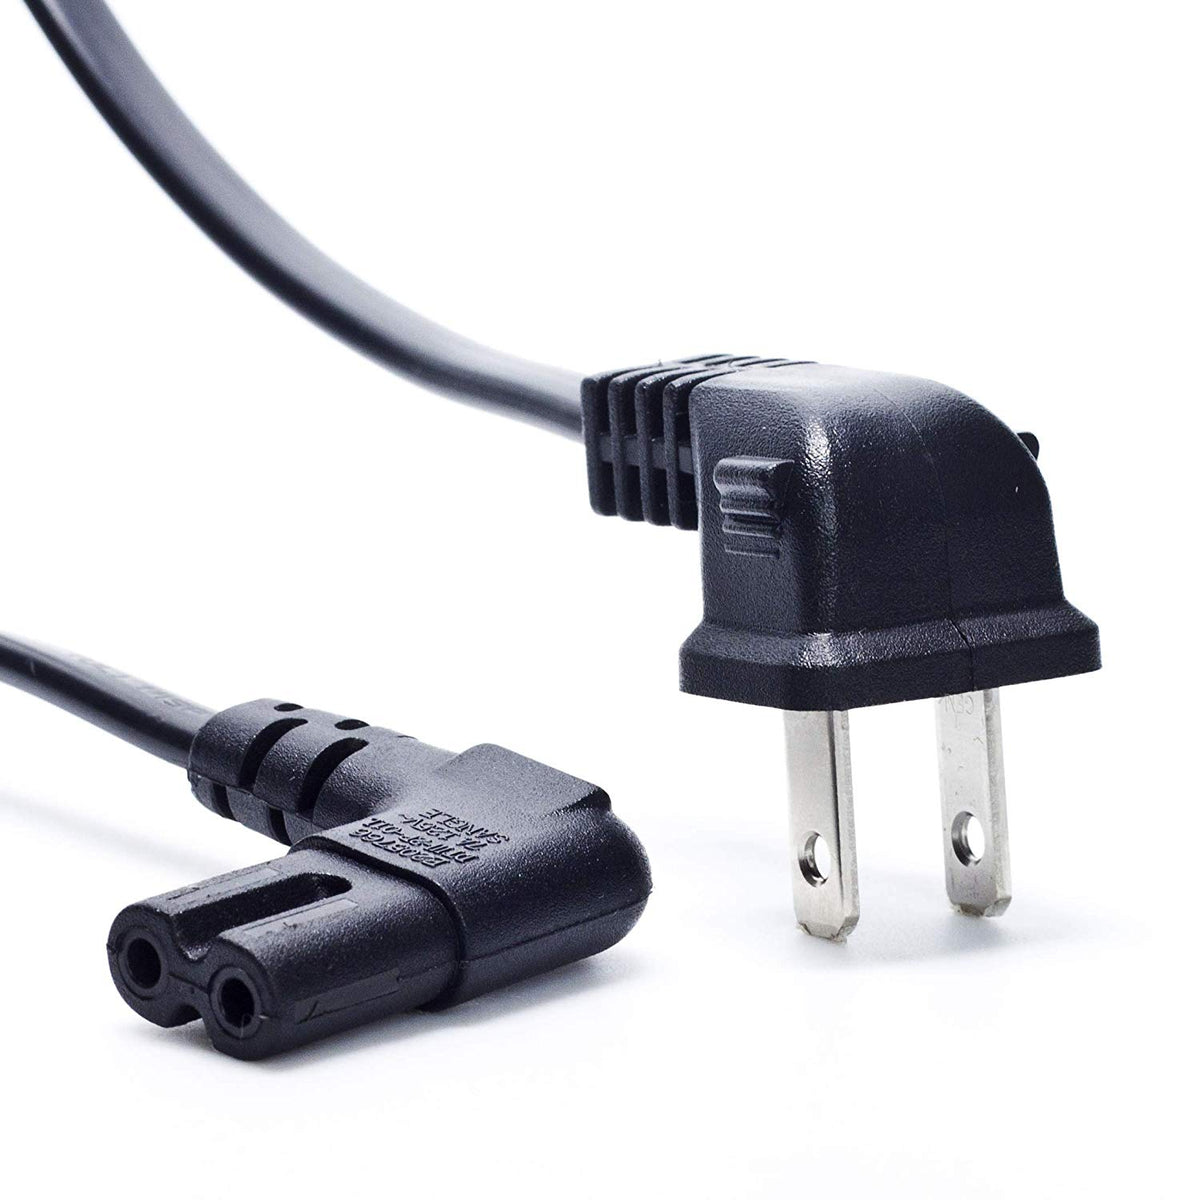 Tv Power Cable Cord 18awg Right Angle 90 Degree 2 Prong To L Shaped C7 For Samsung Philips 3820